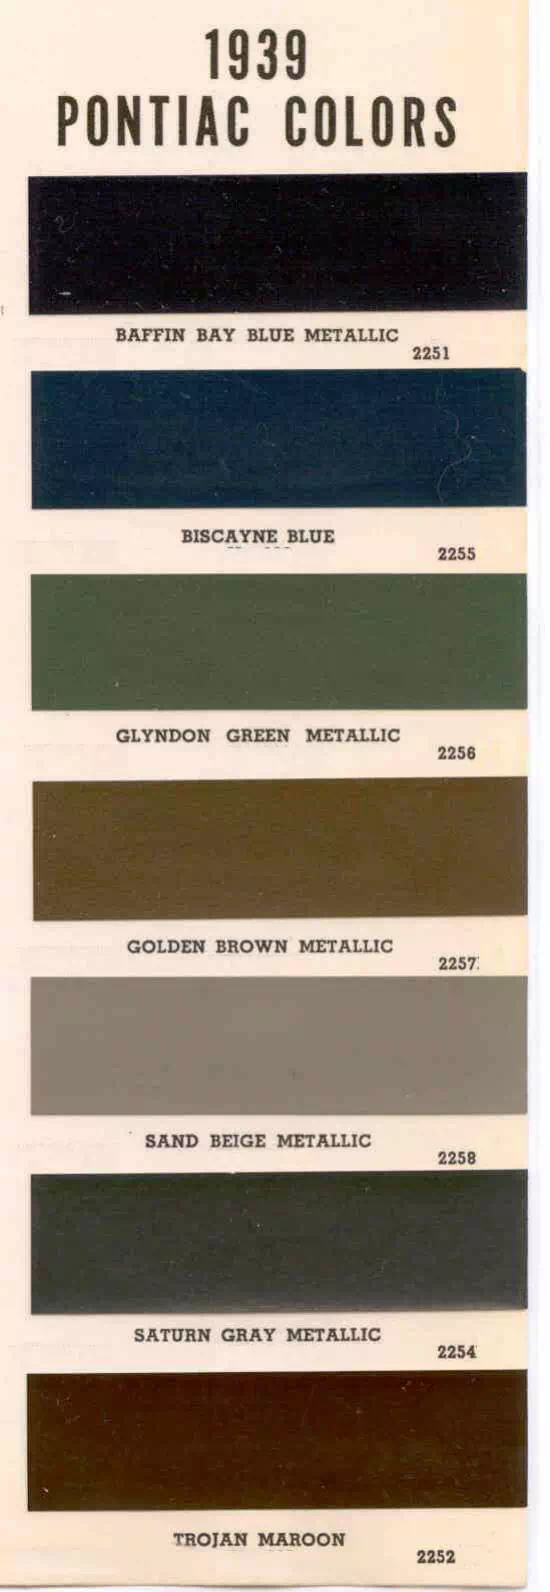 Exterior Colors used on Pontiac Vehicles in 1939